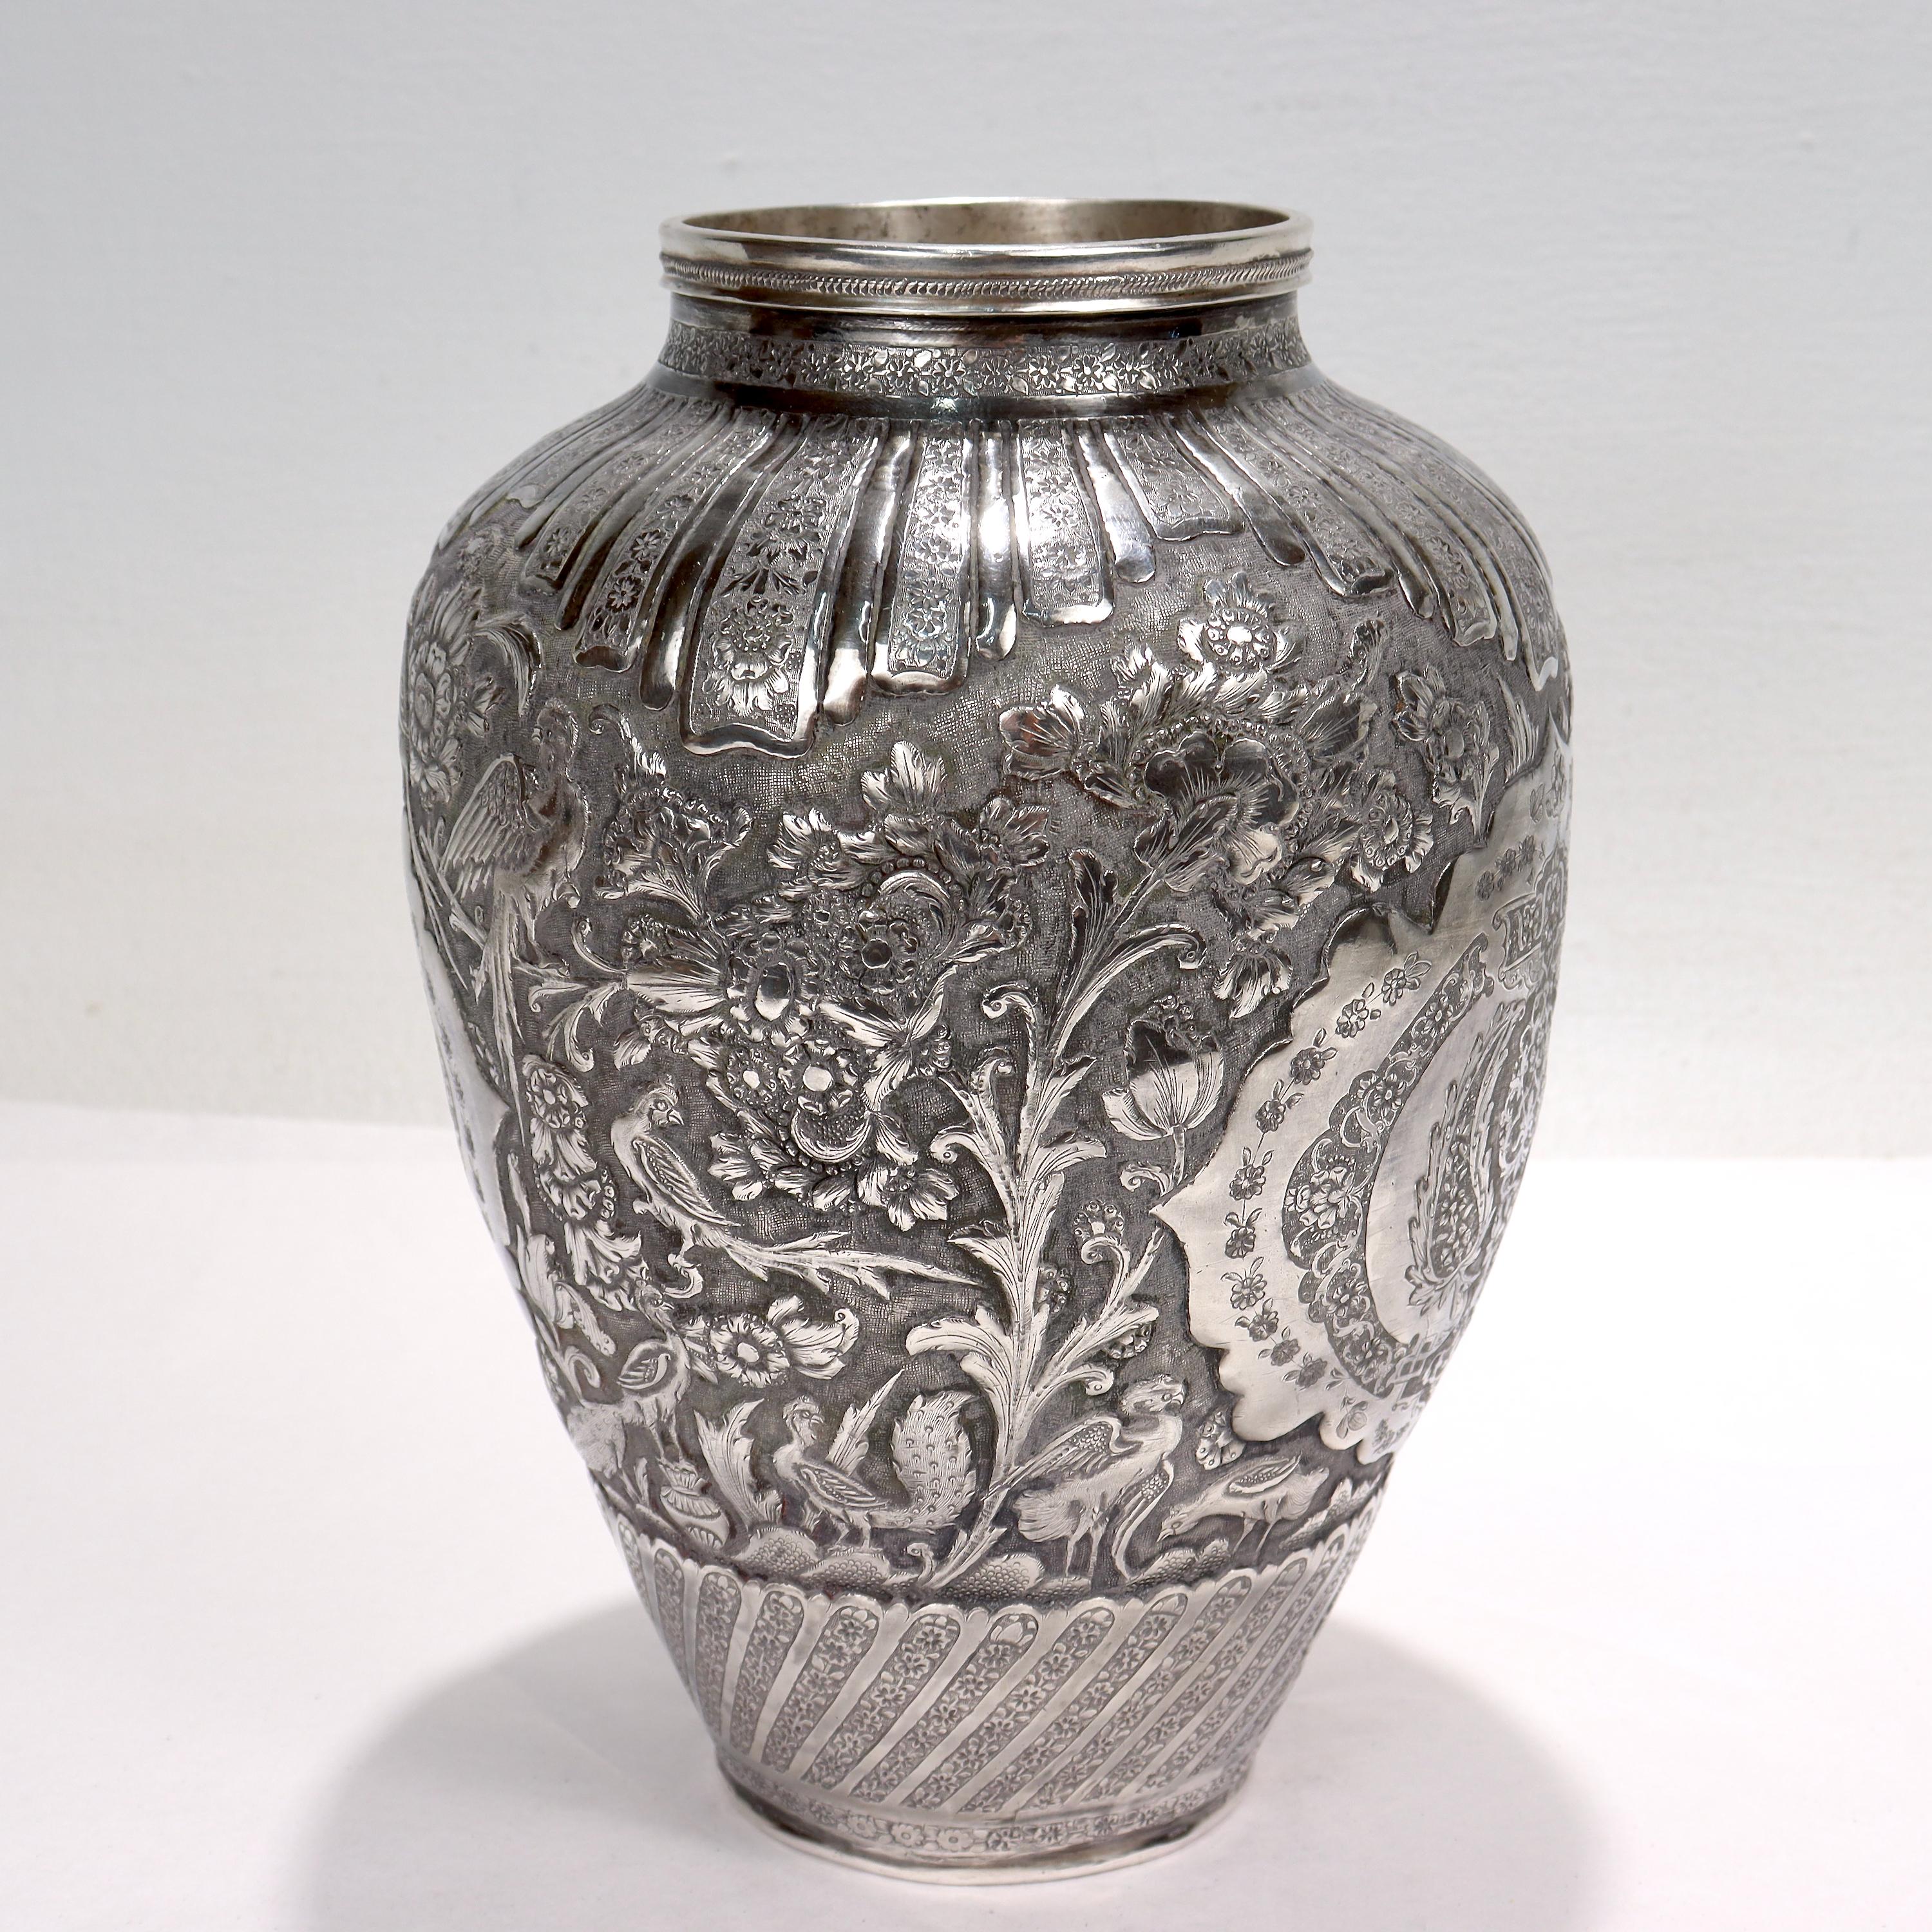 Old or Antique Signed Islamic Ottoman or Persian Repousse Silver Vase In Good Condition For Sale In Philadelphia, PA